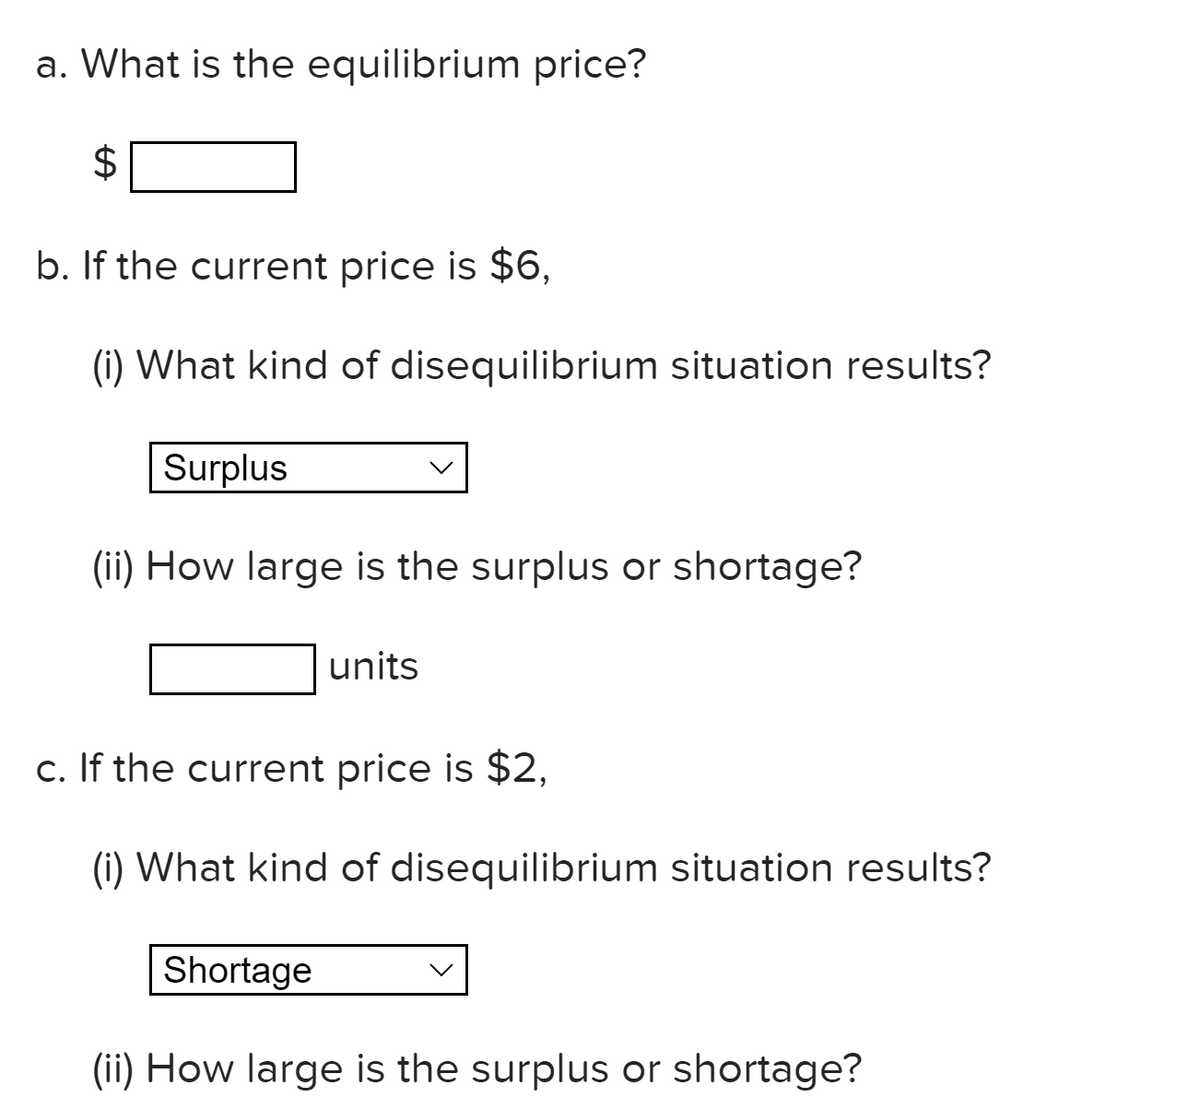 a. What is the equilibrium price?
b. If the current price is $6,
(i) What kind of disequilibrium situation results?
Surplus
(ii) How large is the surplus or shortage?
units
c. If the current price is $2,
(i) What kind of disequilibrium situation results?
Shortage
(ii) How large is the surplus or shortage?
%24
